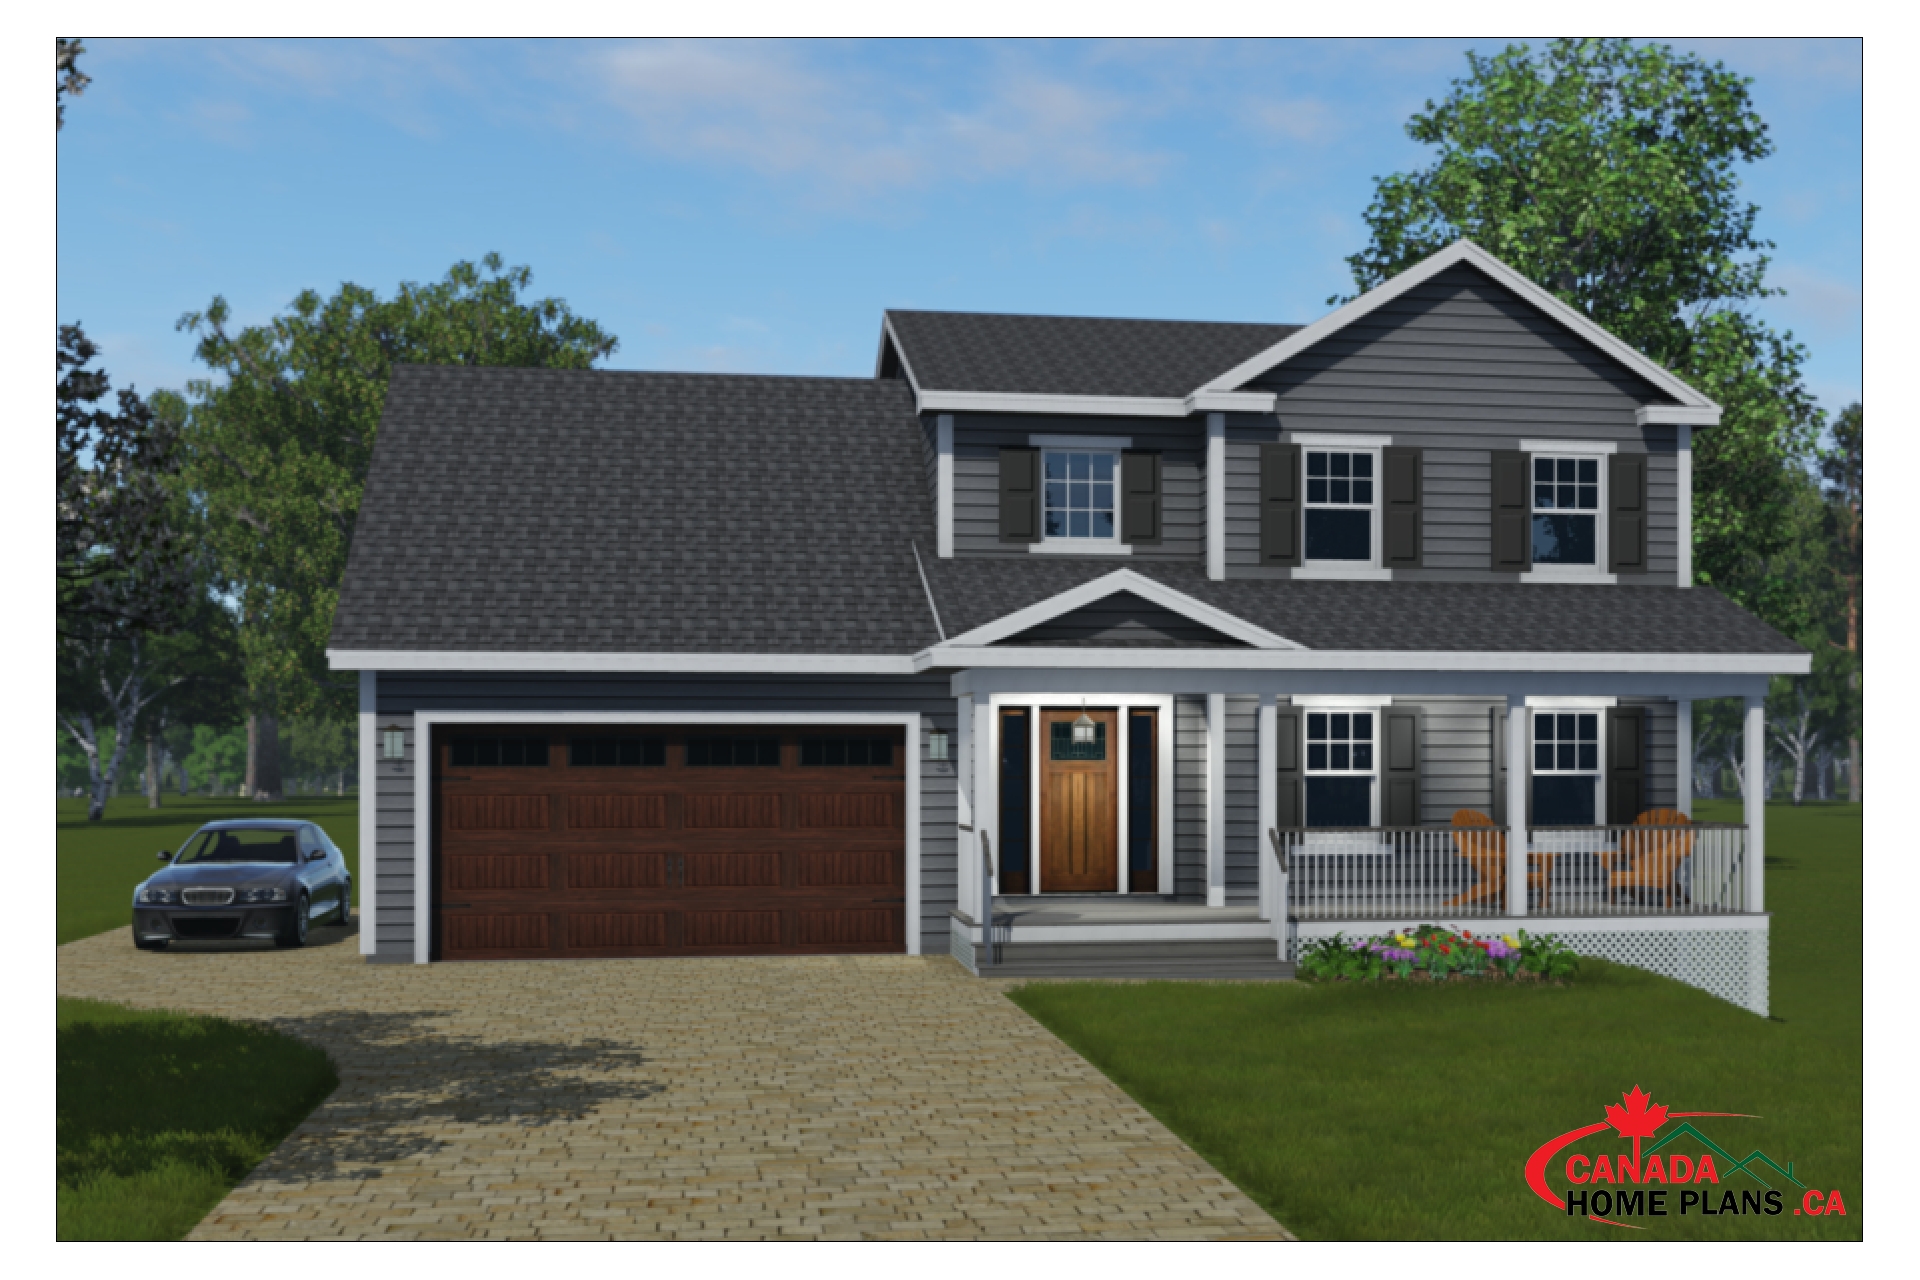 Pictou Canada  Home  Plans 